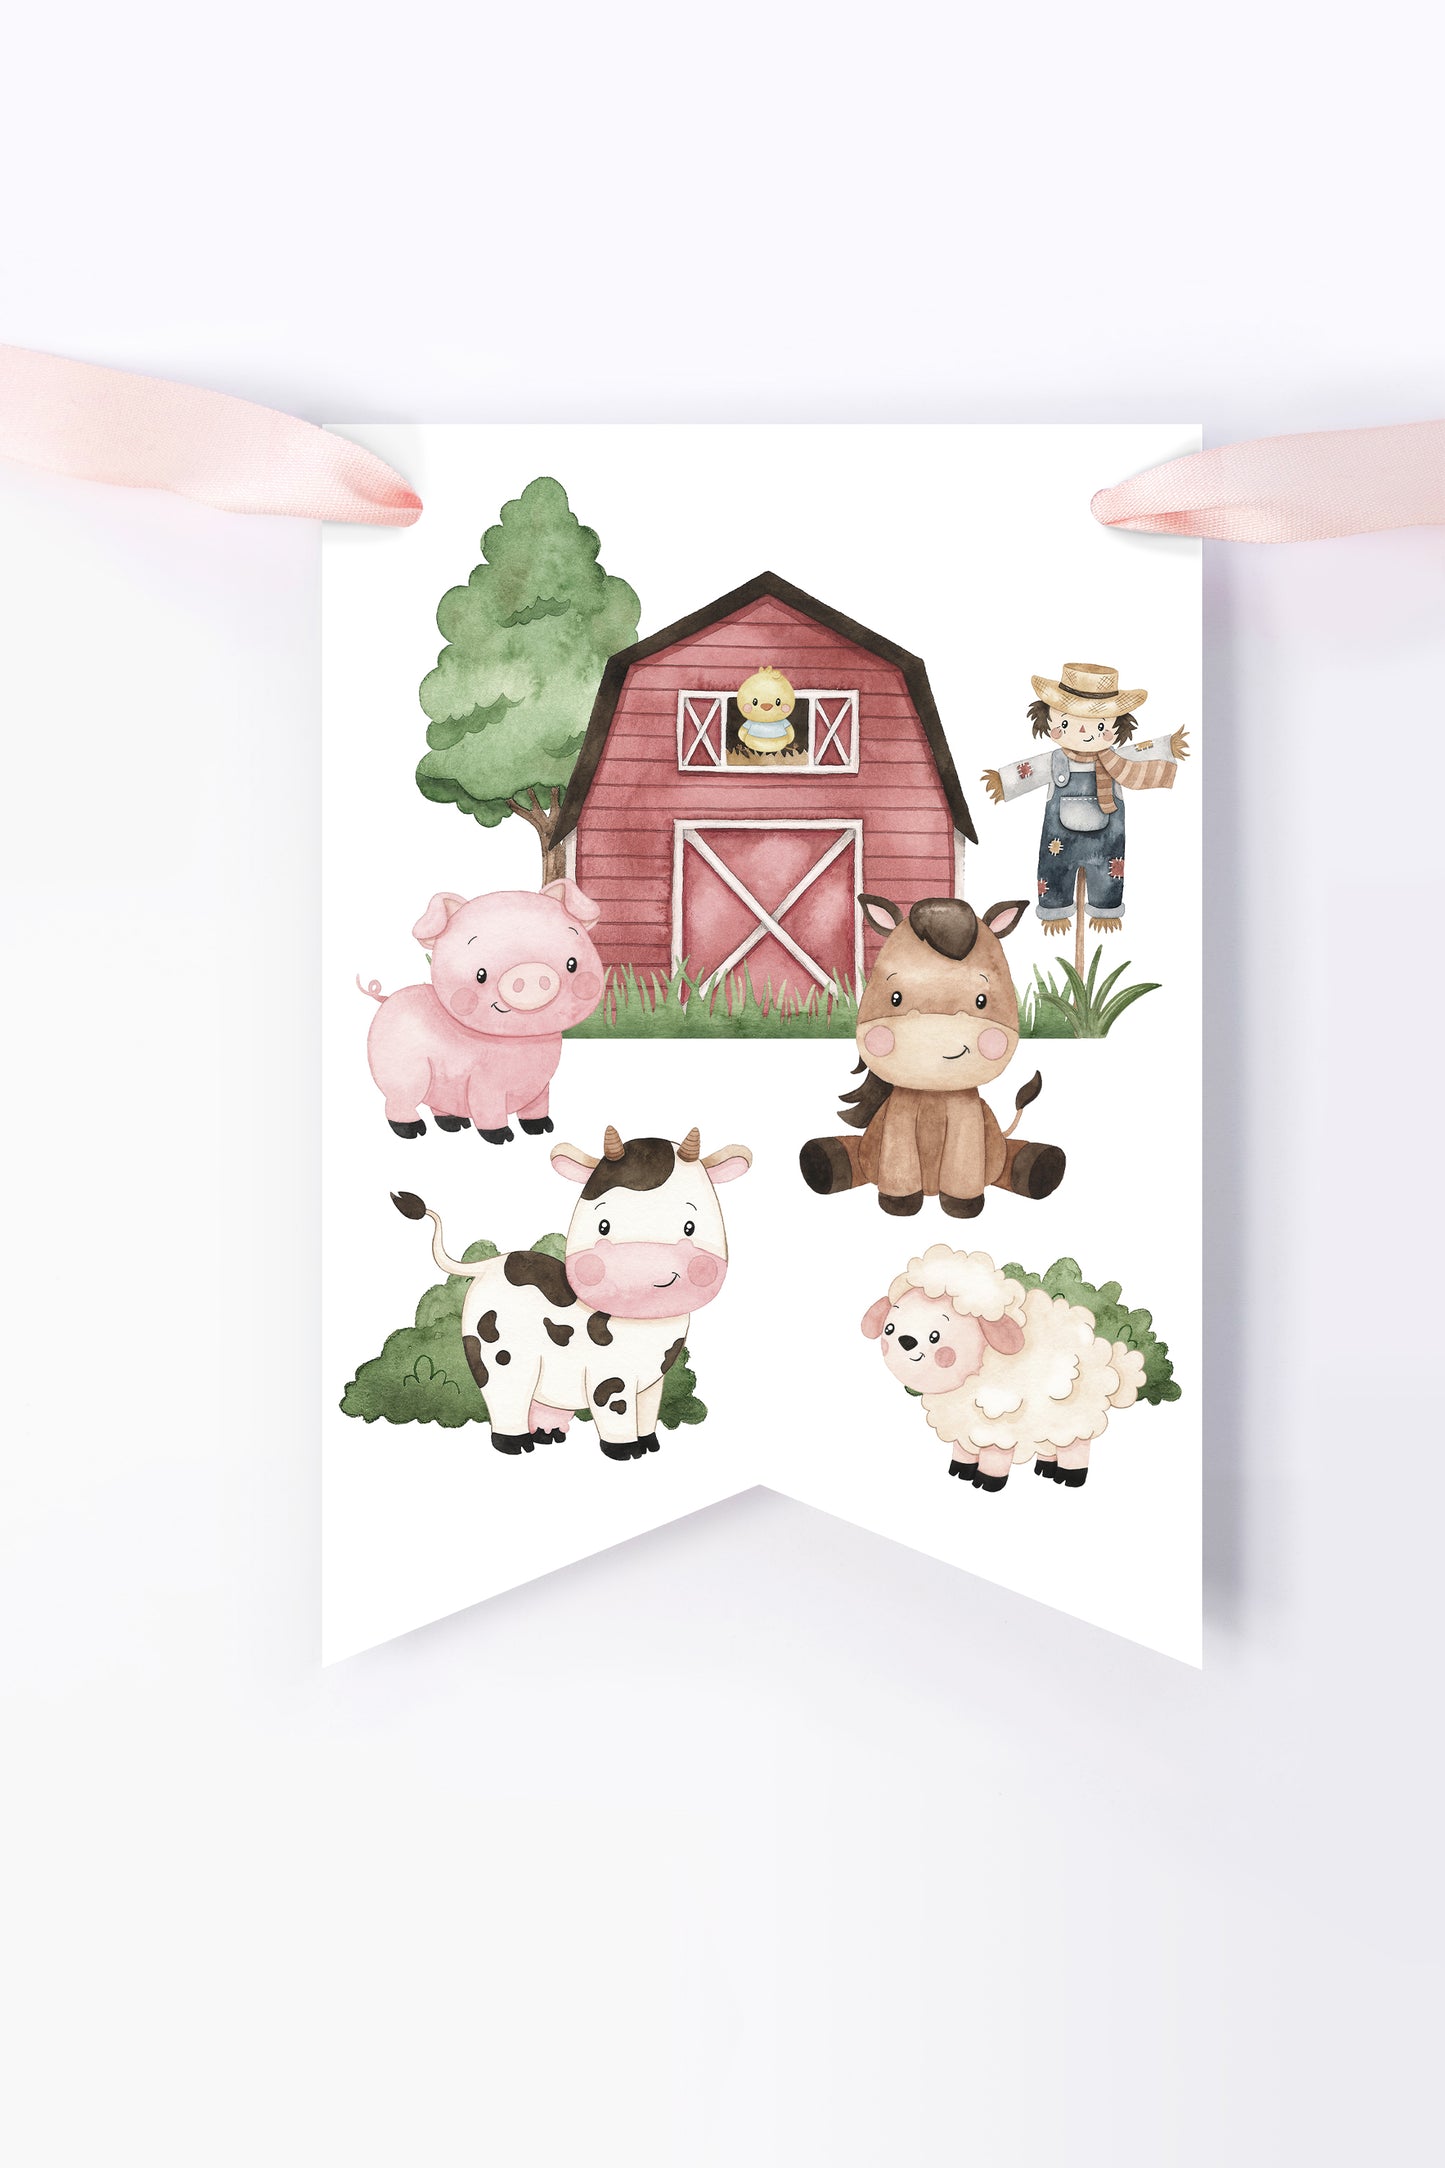 Farm TWO High Chair Banner | Barnyard 2nd Birthday Party Decorations - 11A